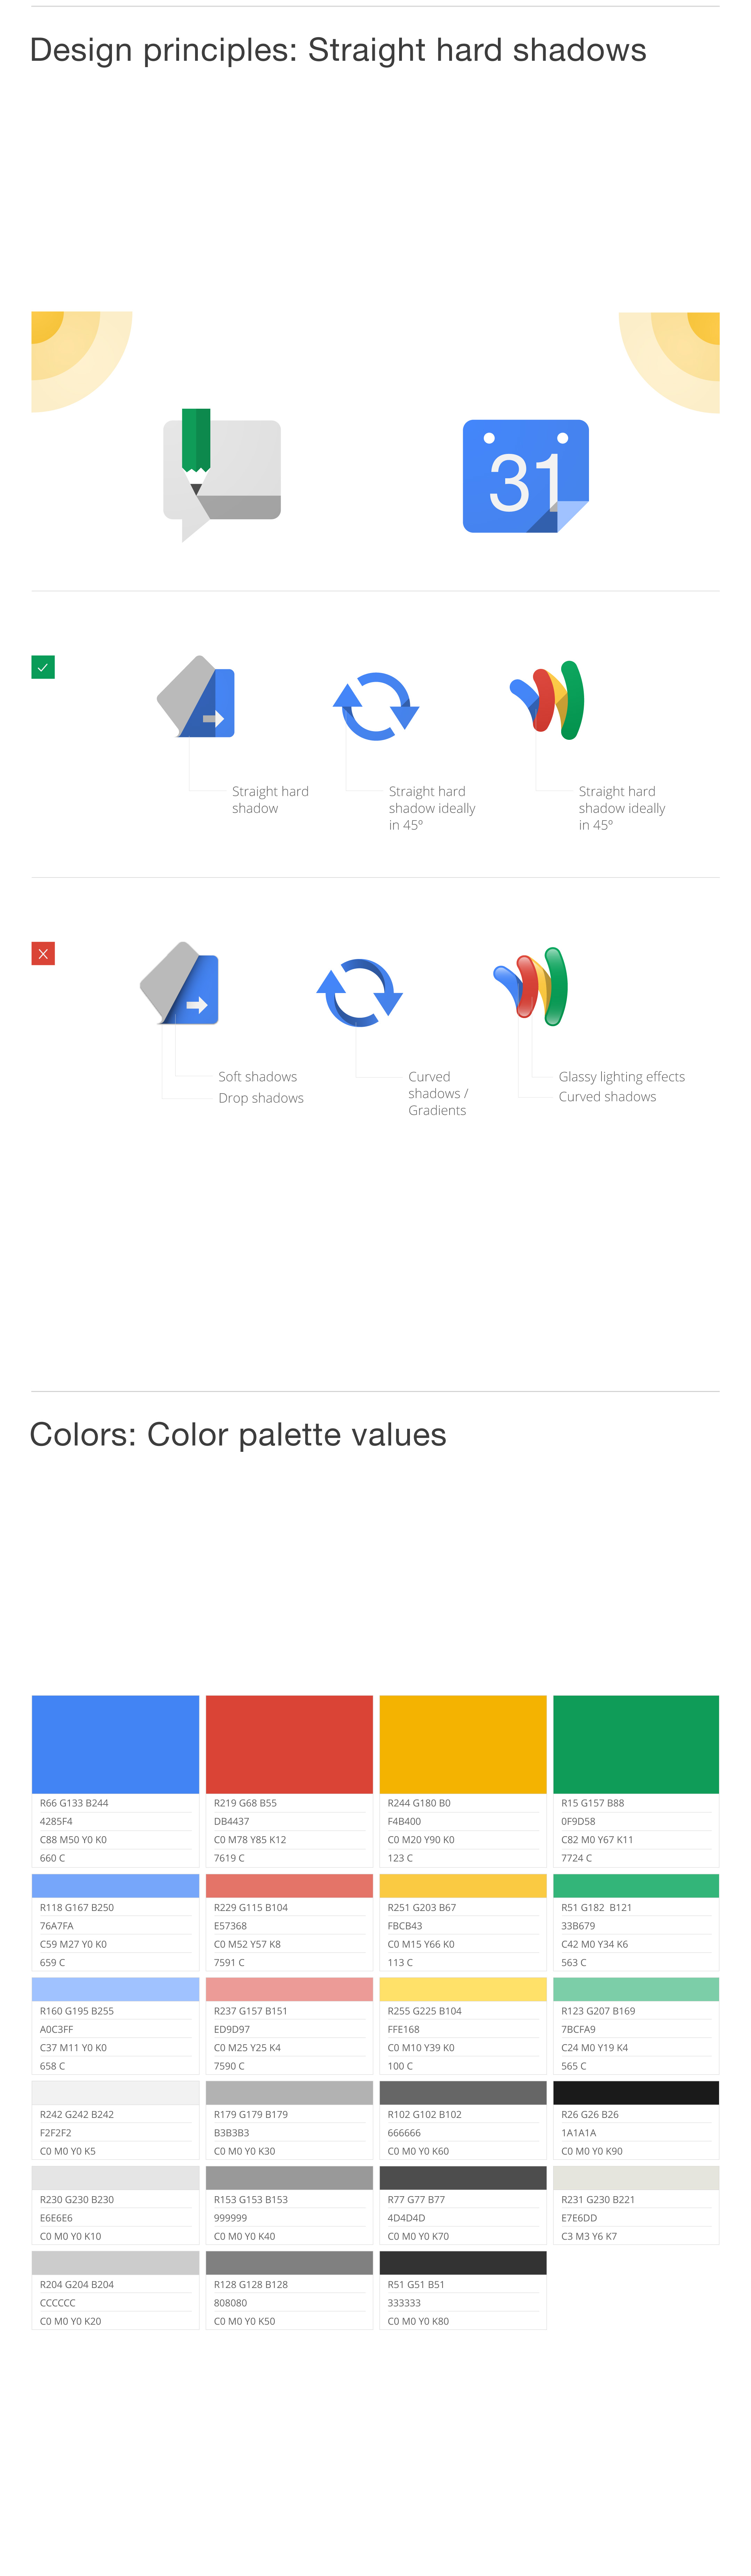 Google: Visual Assets Guidelines